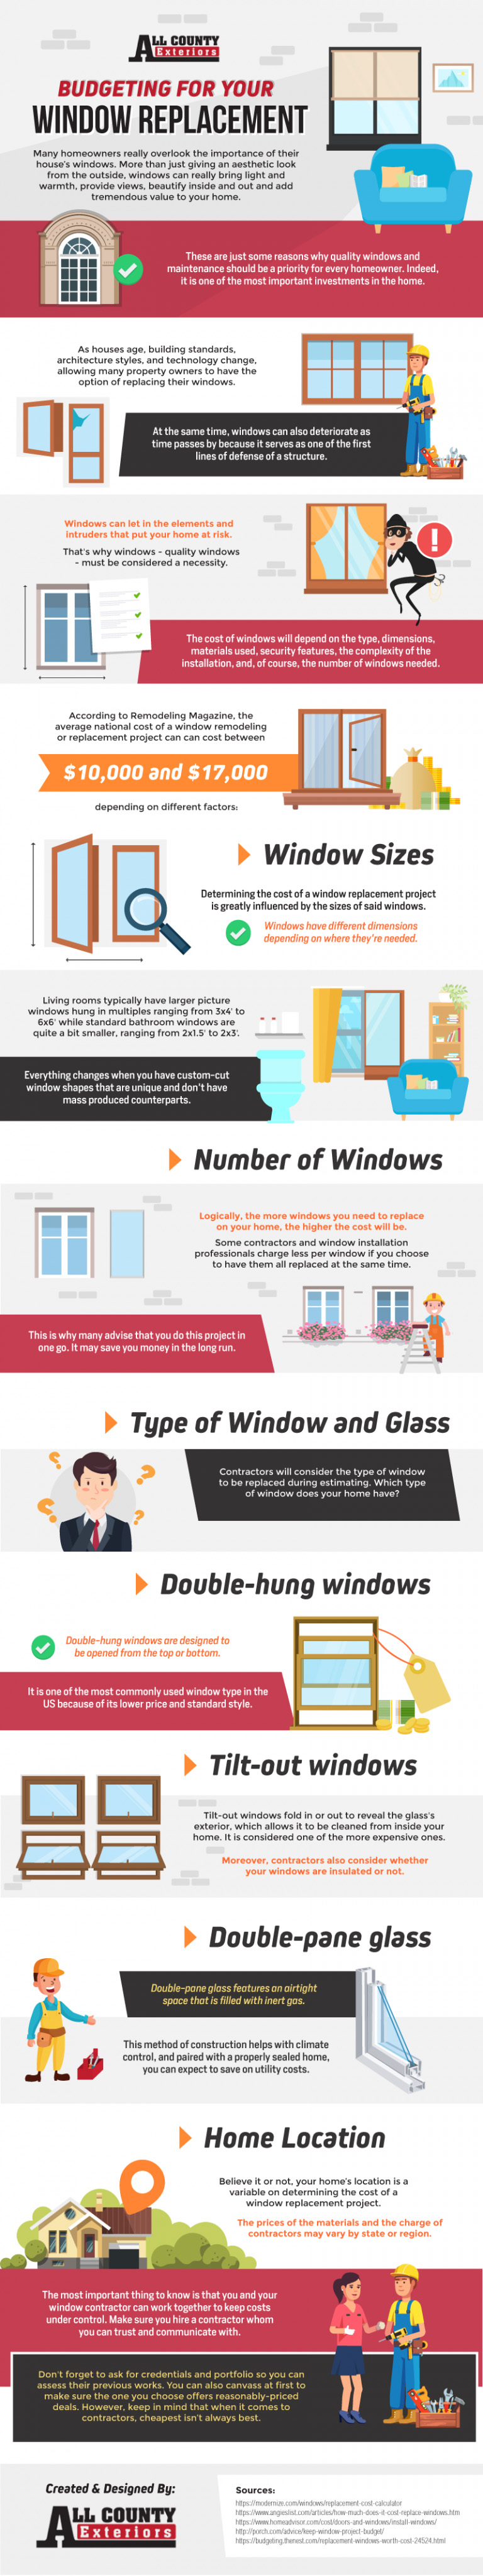 Budgeting for Your Window Replacement 